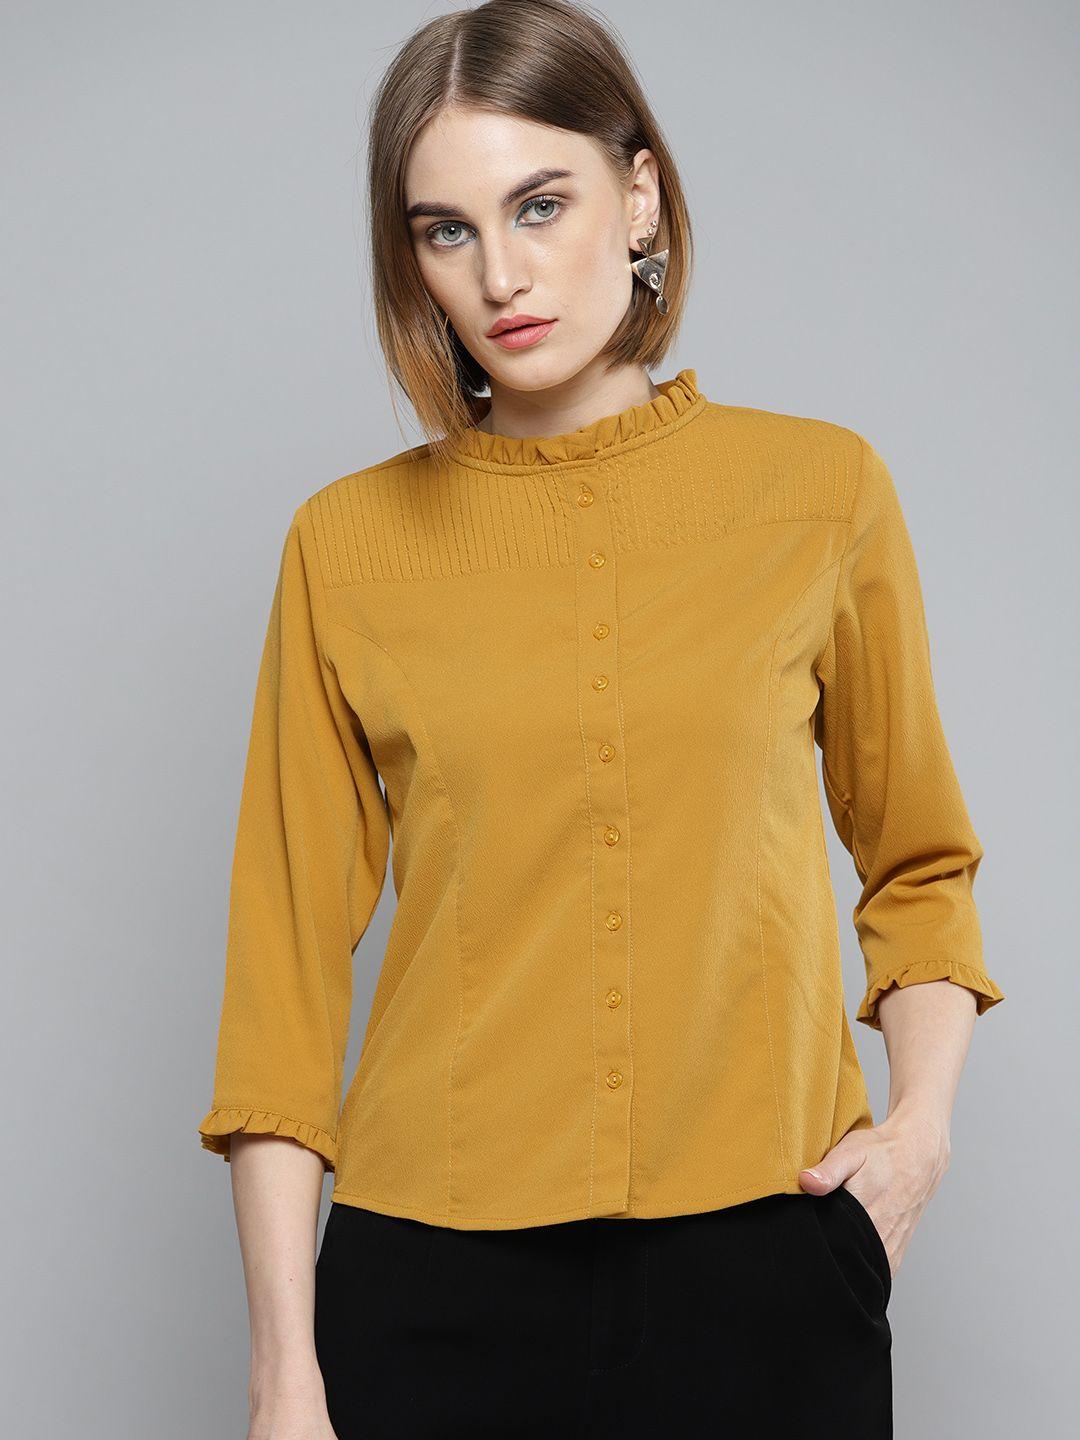 marie claire women mustard yellow regular fit solid casual shirt